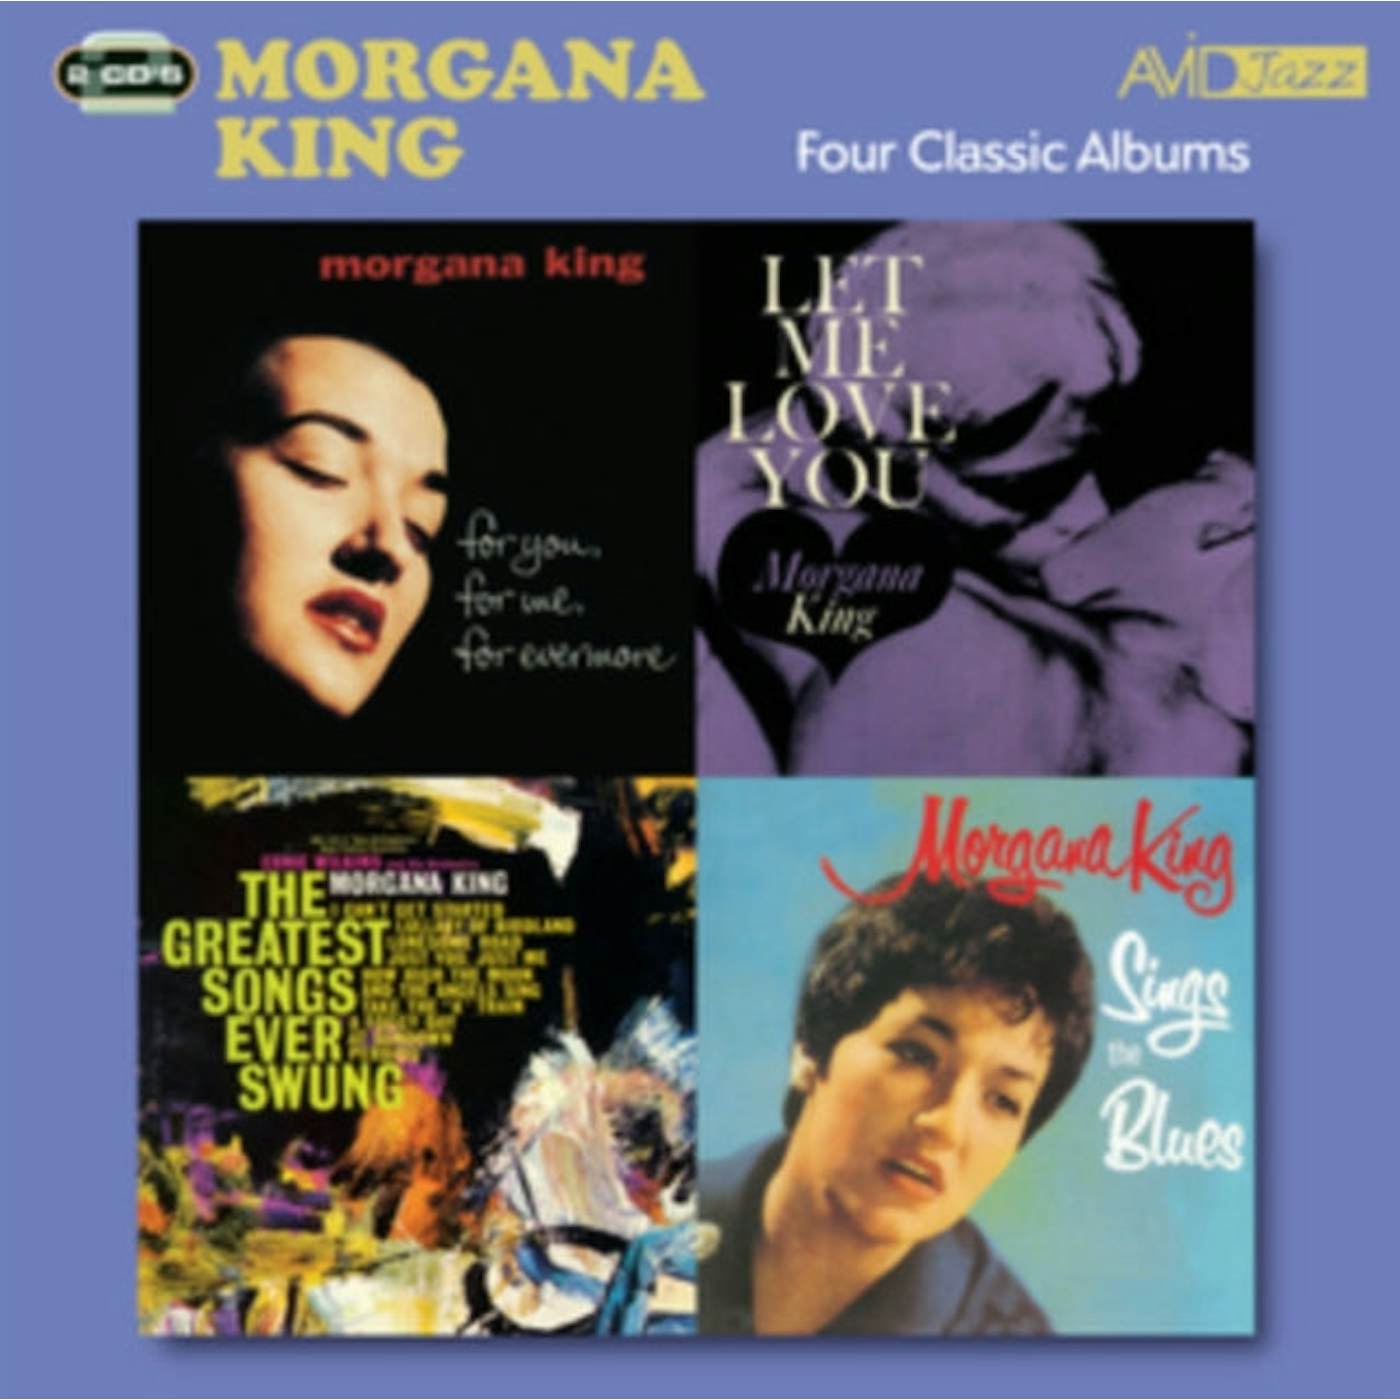 Morgana King CD - Four Classic Albums (For You. For Me. For Evermore / Sings The Blues / The Greatest Songs Ever Swung / Let Me Love You)